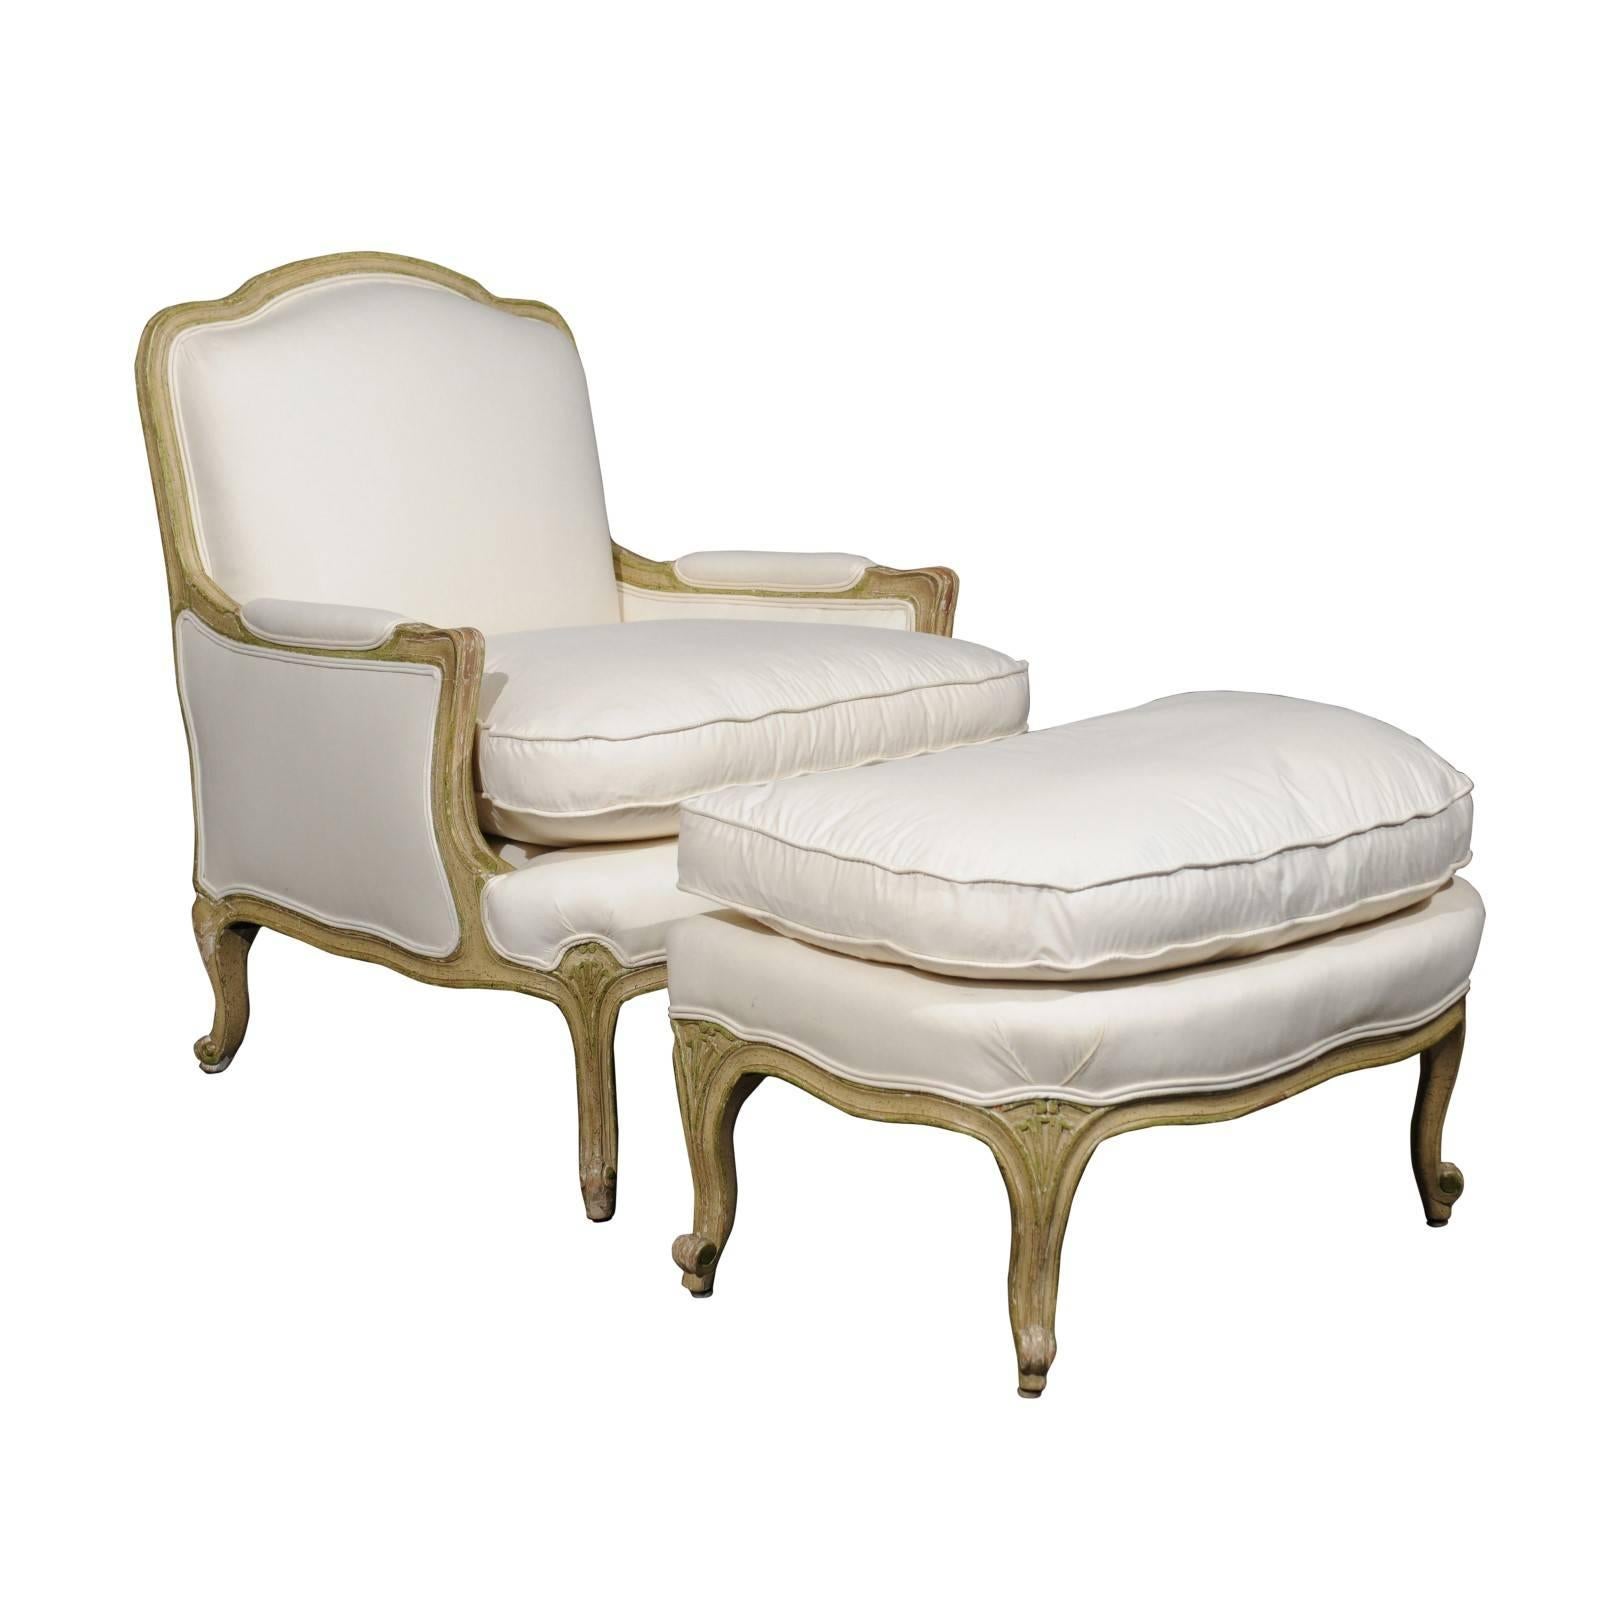 Louis XV French Bergère Chair and Ottoman from the 18th Century, Reupholstered